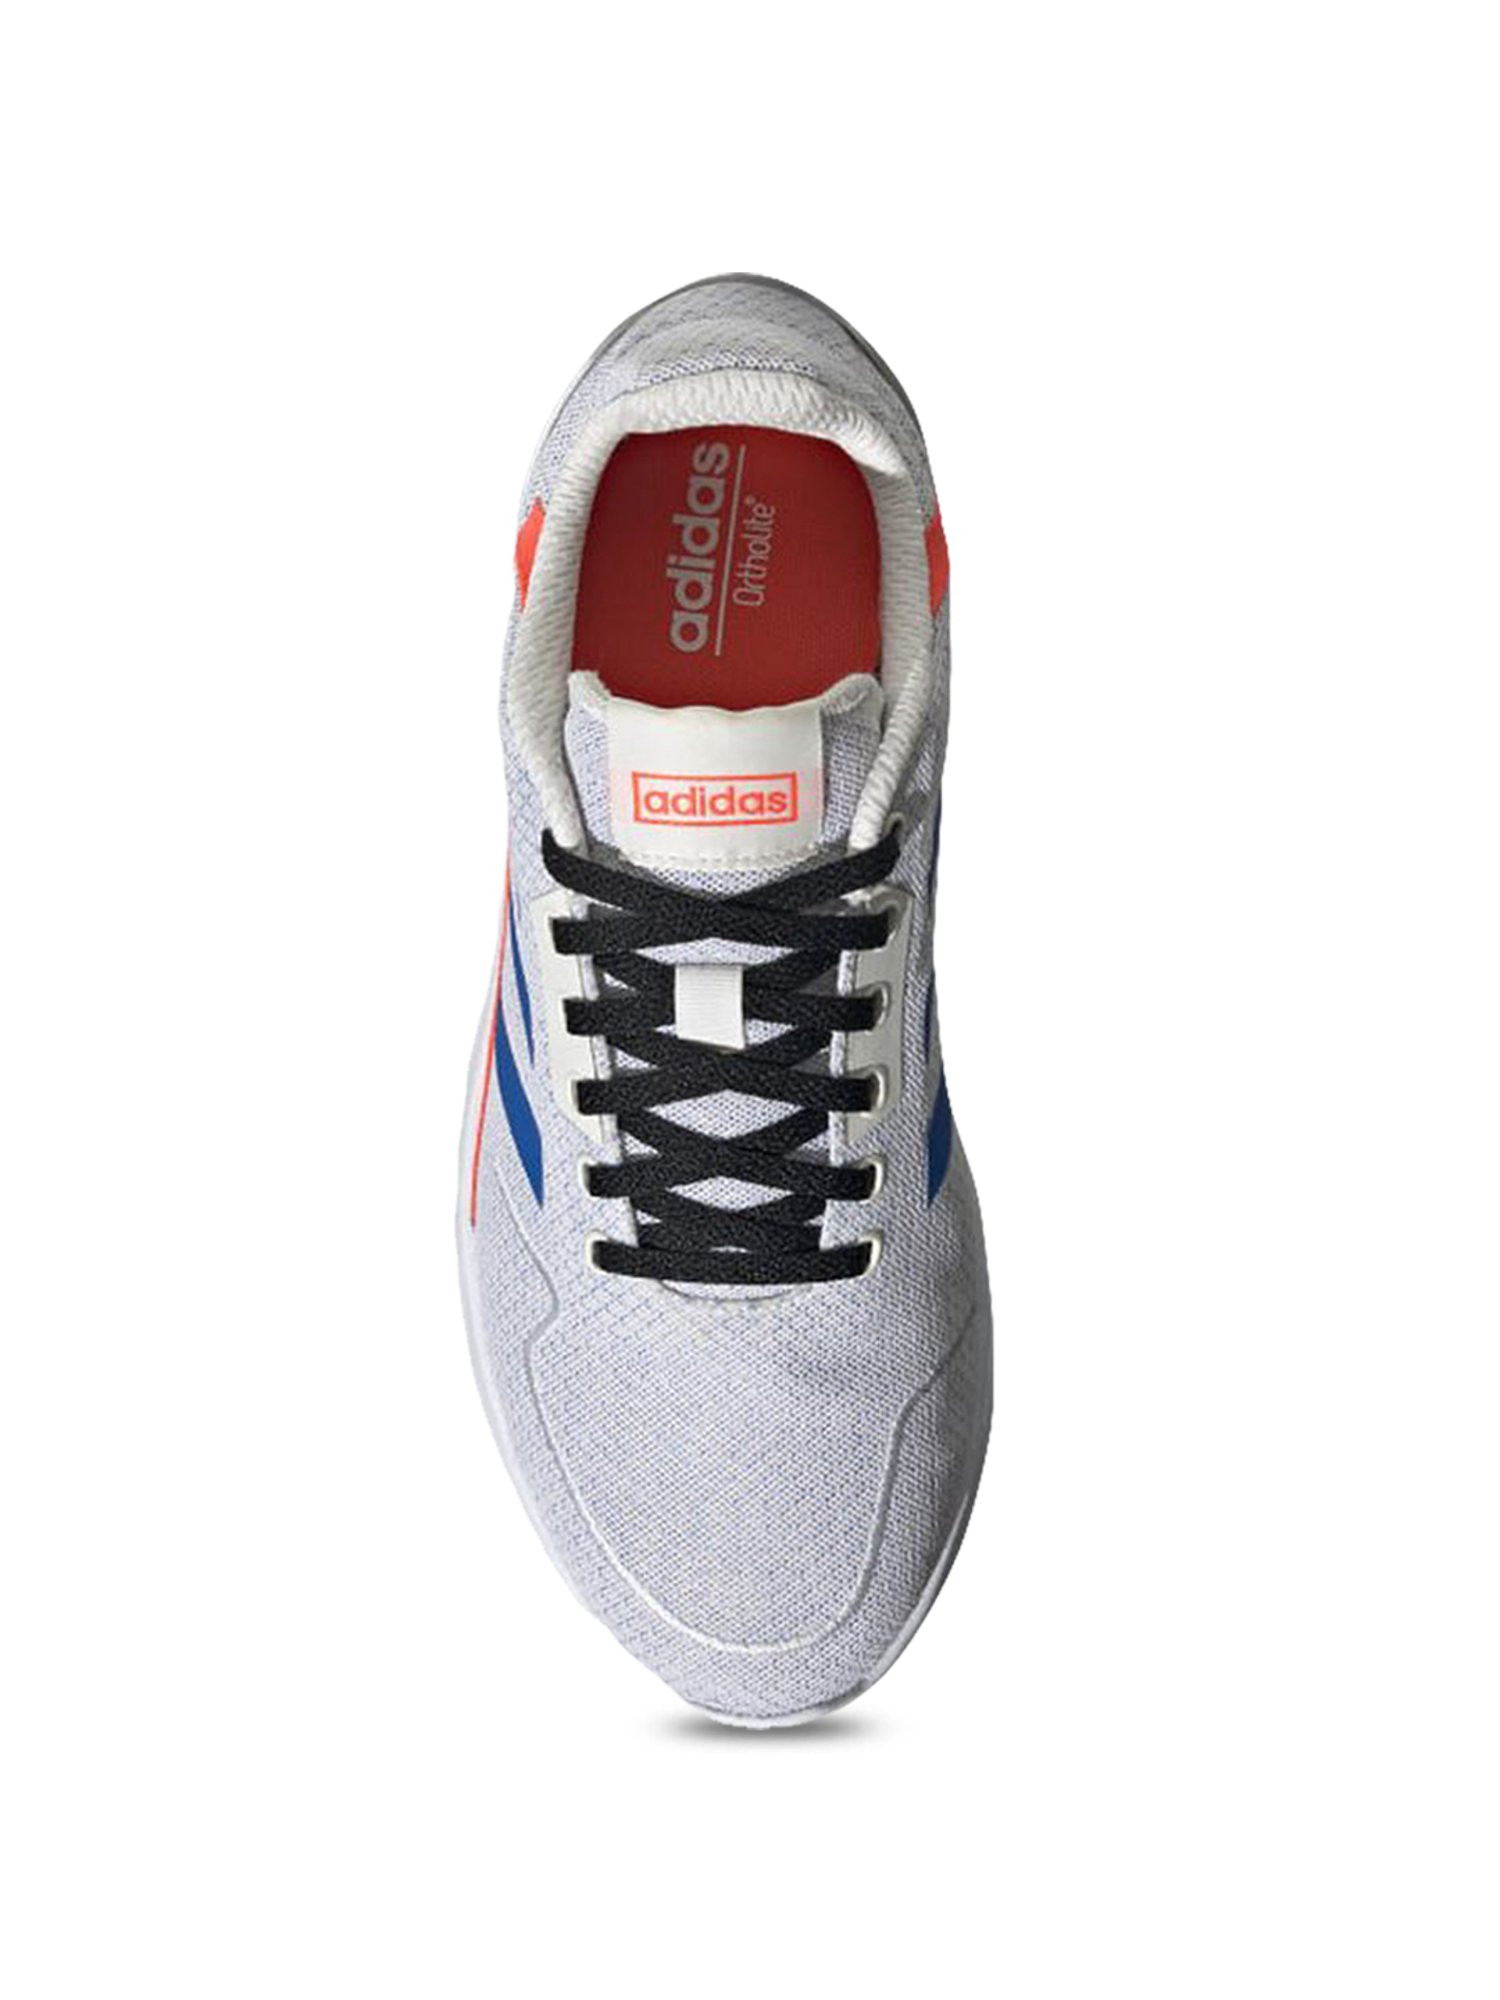 Buy Adidas Nebzed White Sneakers for 